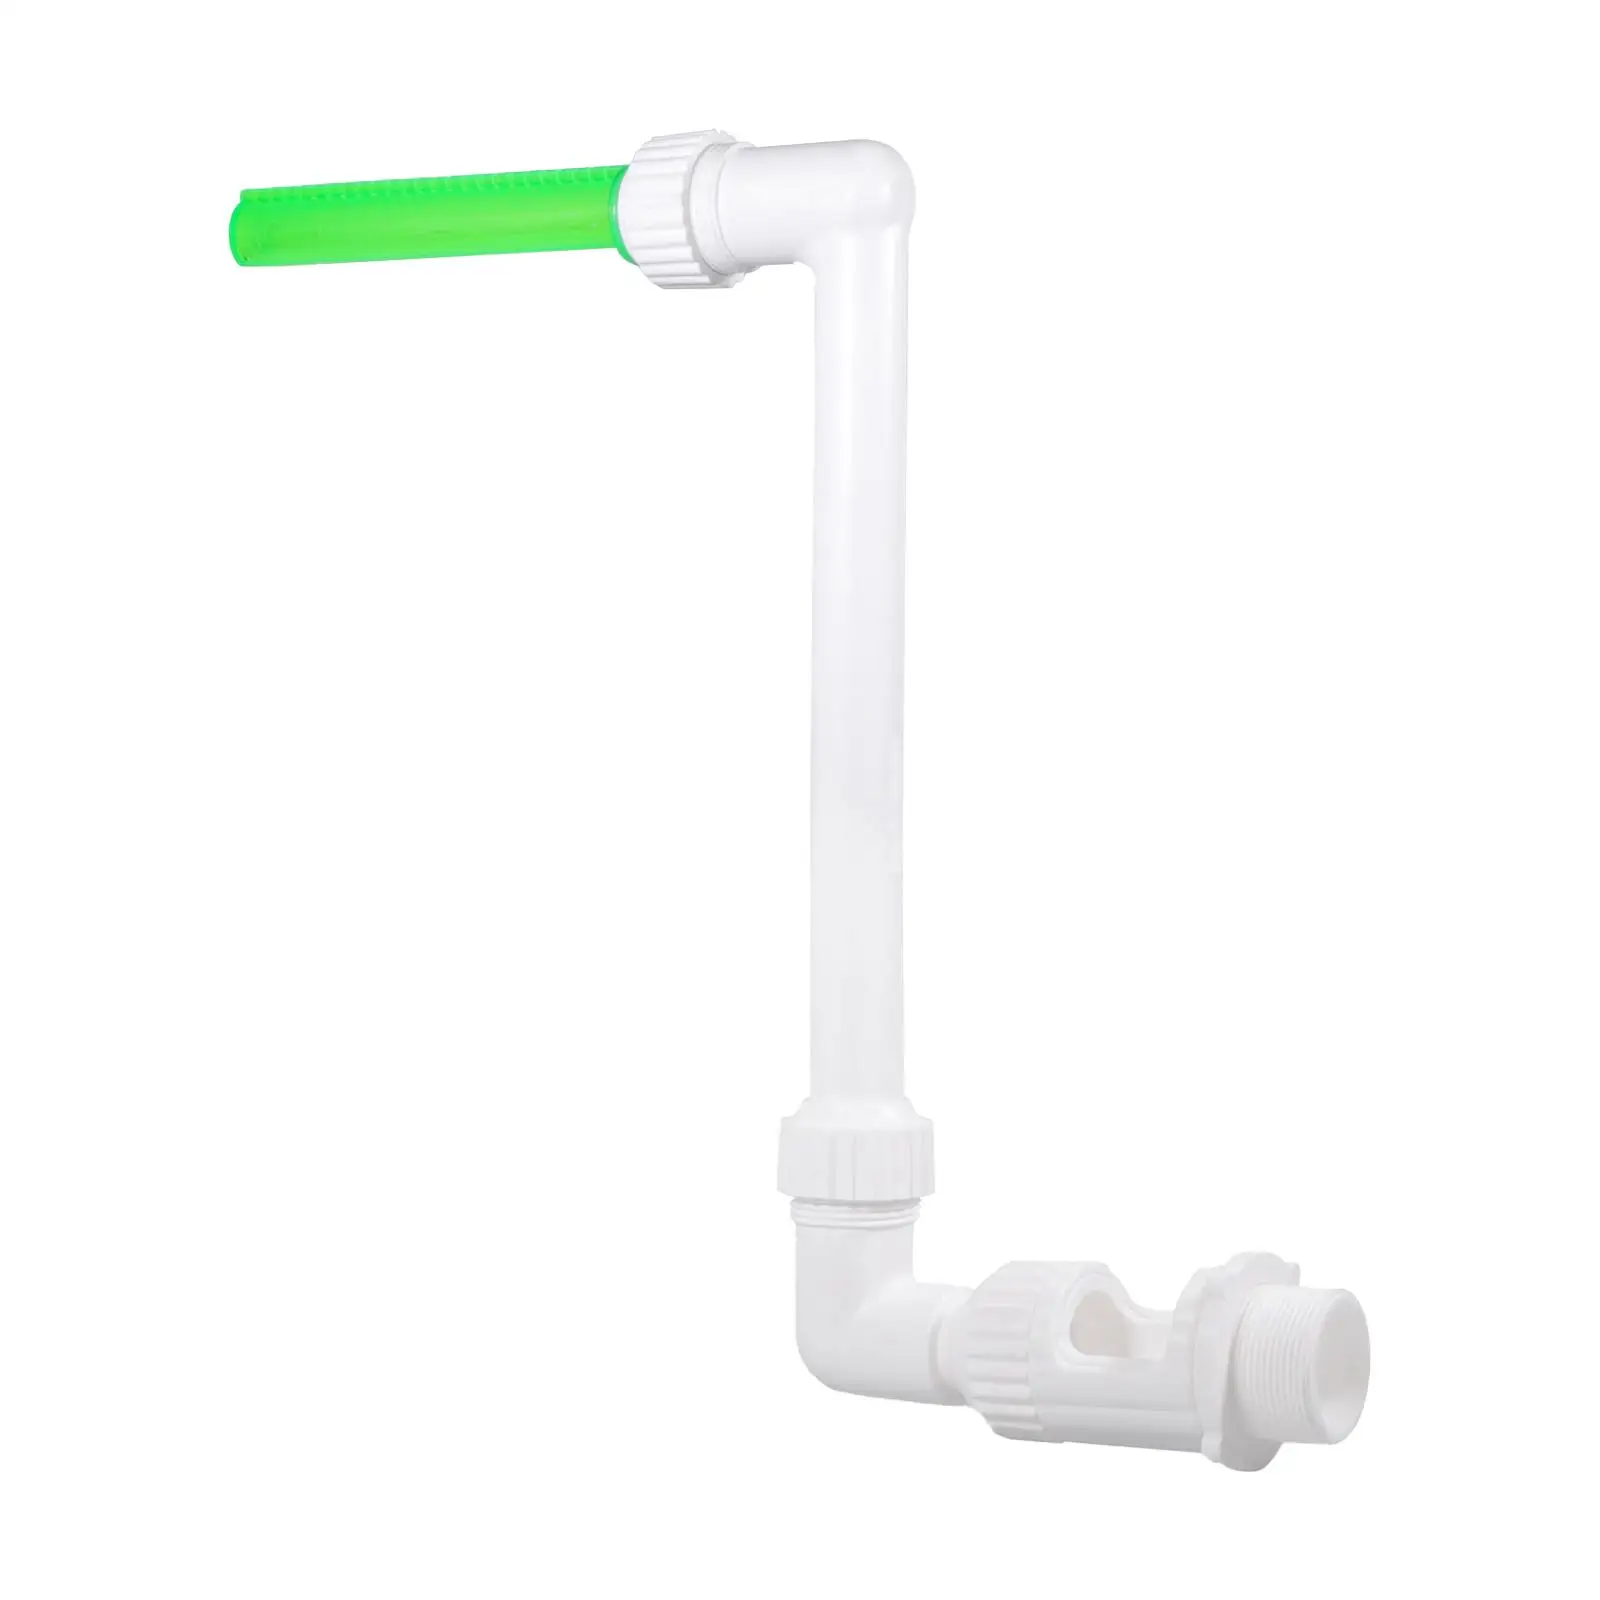 Adjustable Pool Fountain Fun Sprinklers Water Cooling Sprayer Pool Accessories for Backyard Pool Outdoor Decoration